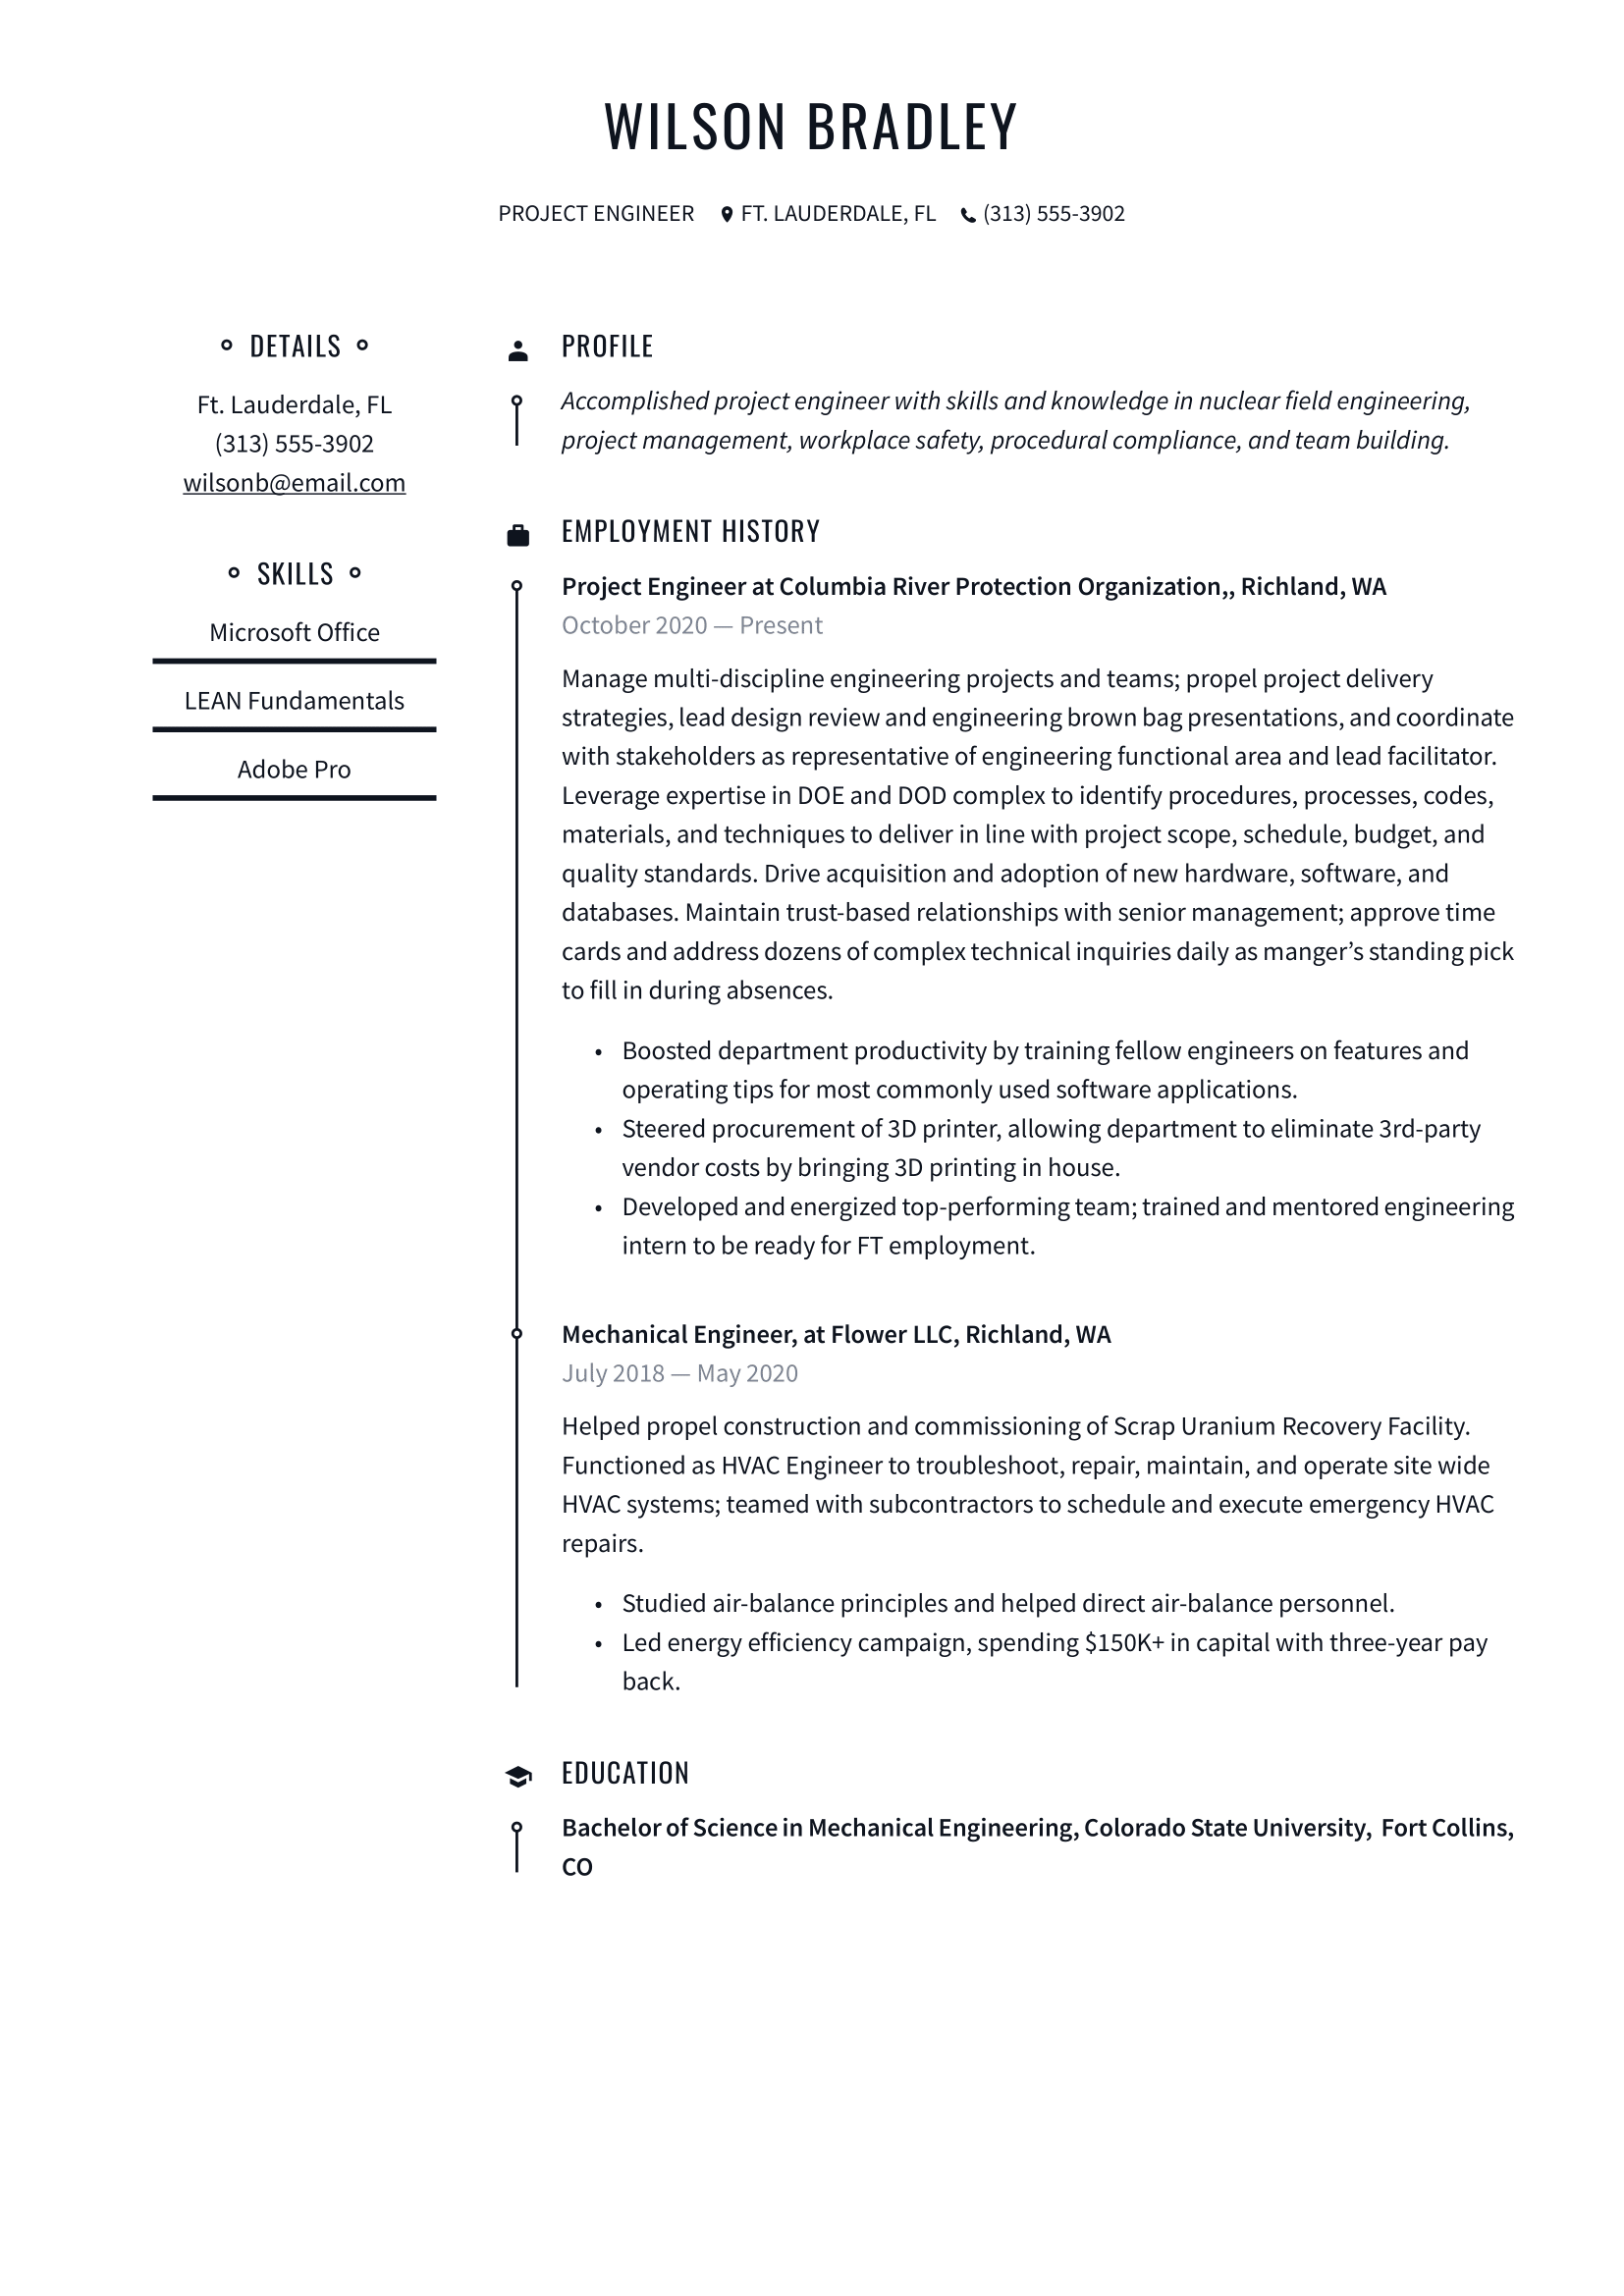 Project Engineer Resume Example And Writing Guide